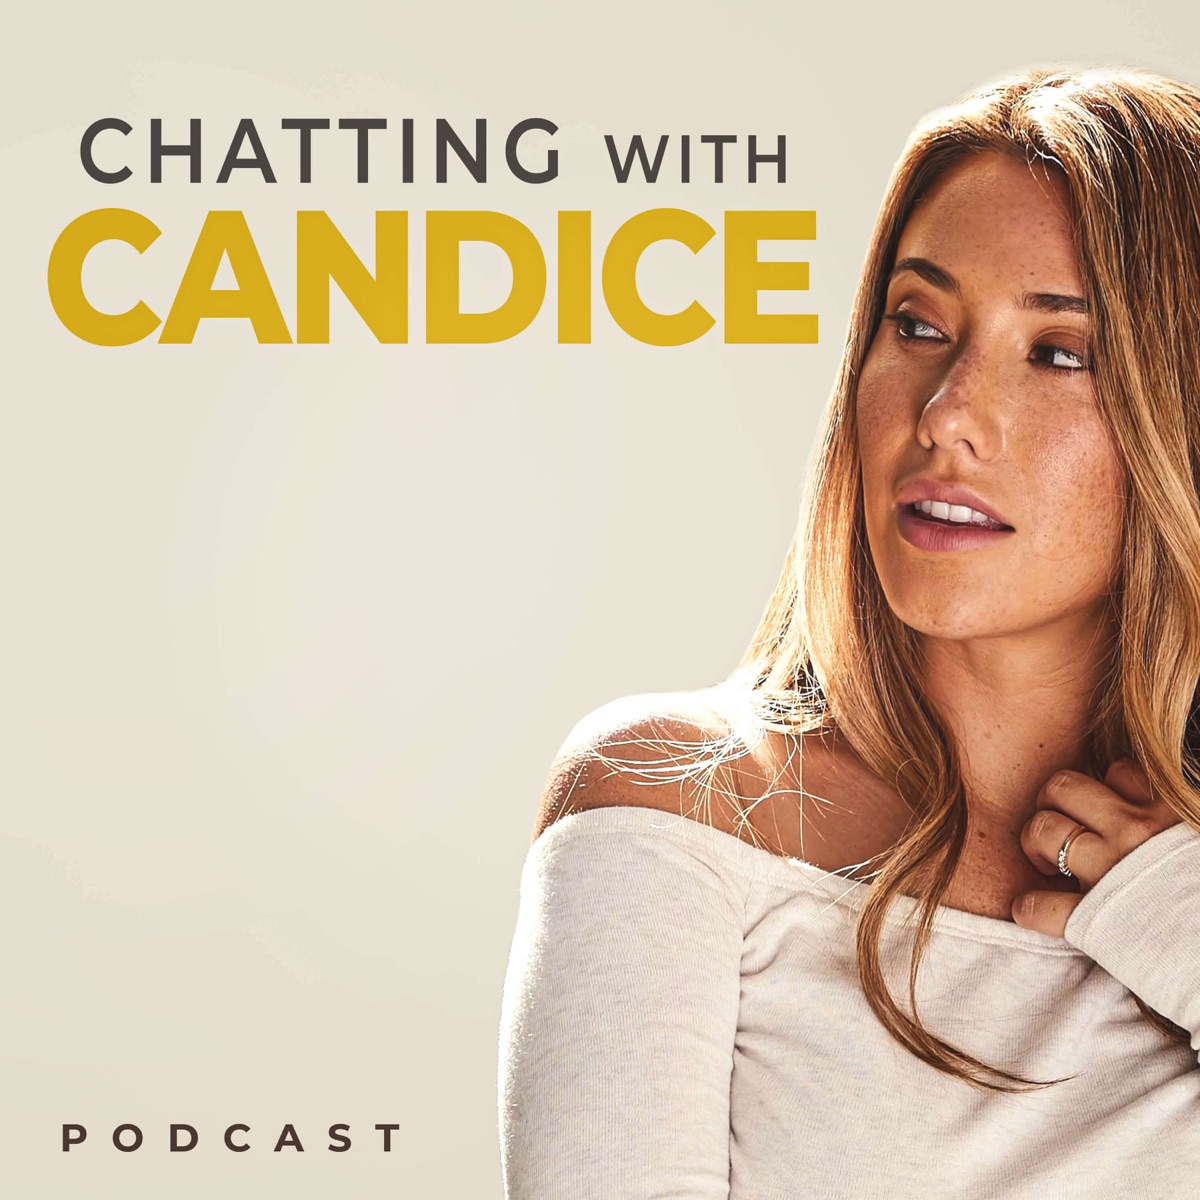 Chatting with Candice – Podcast image picture